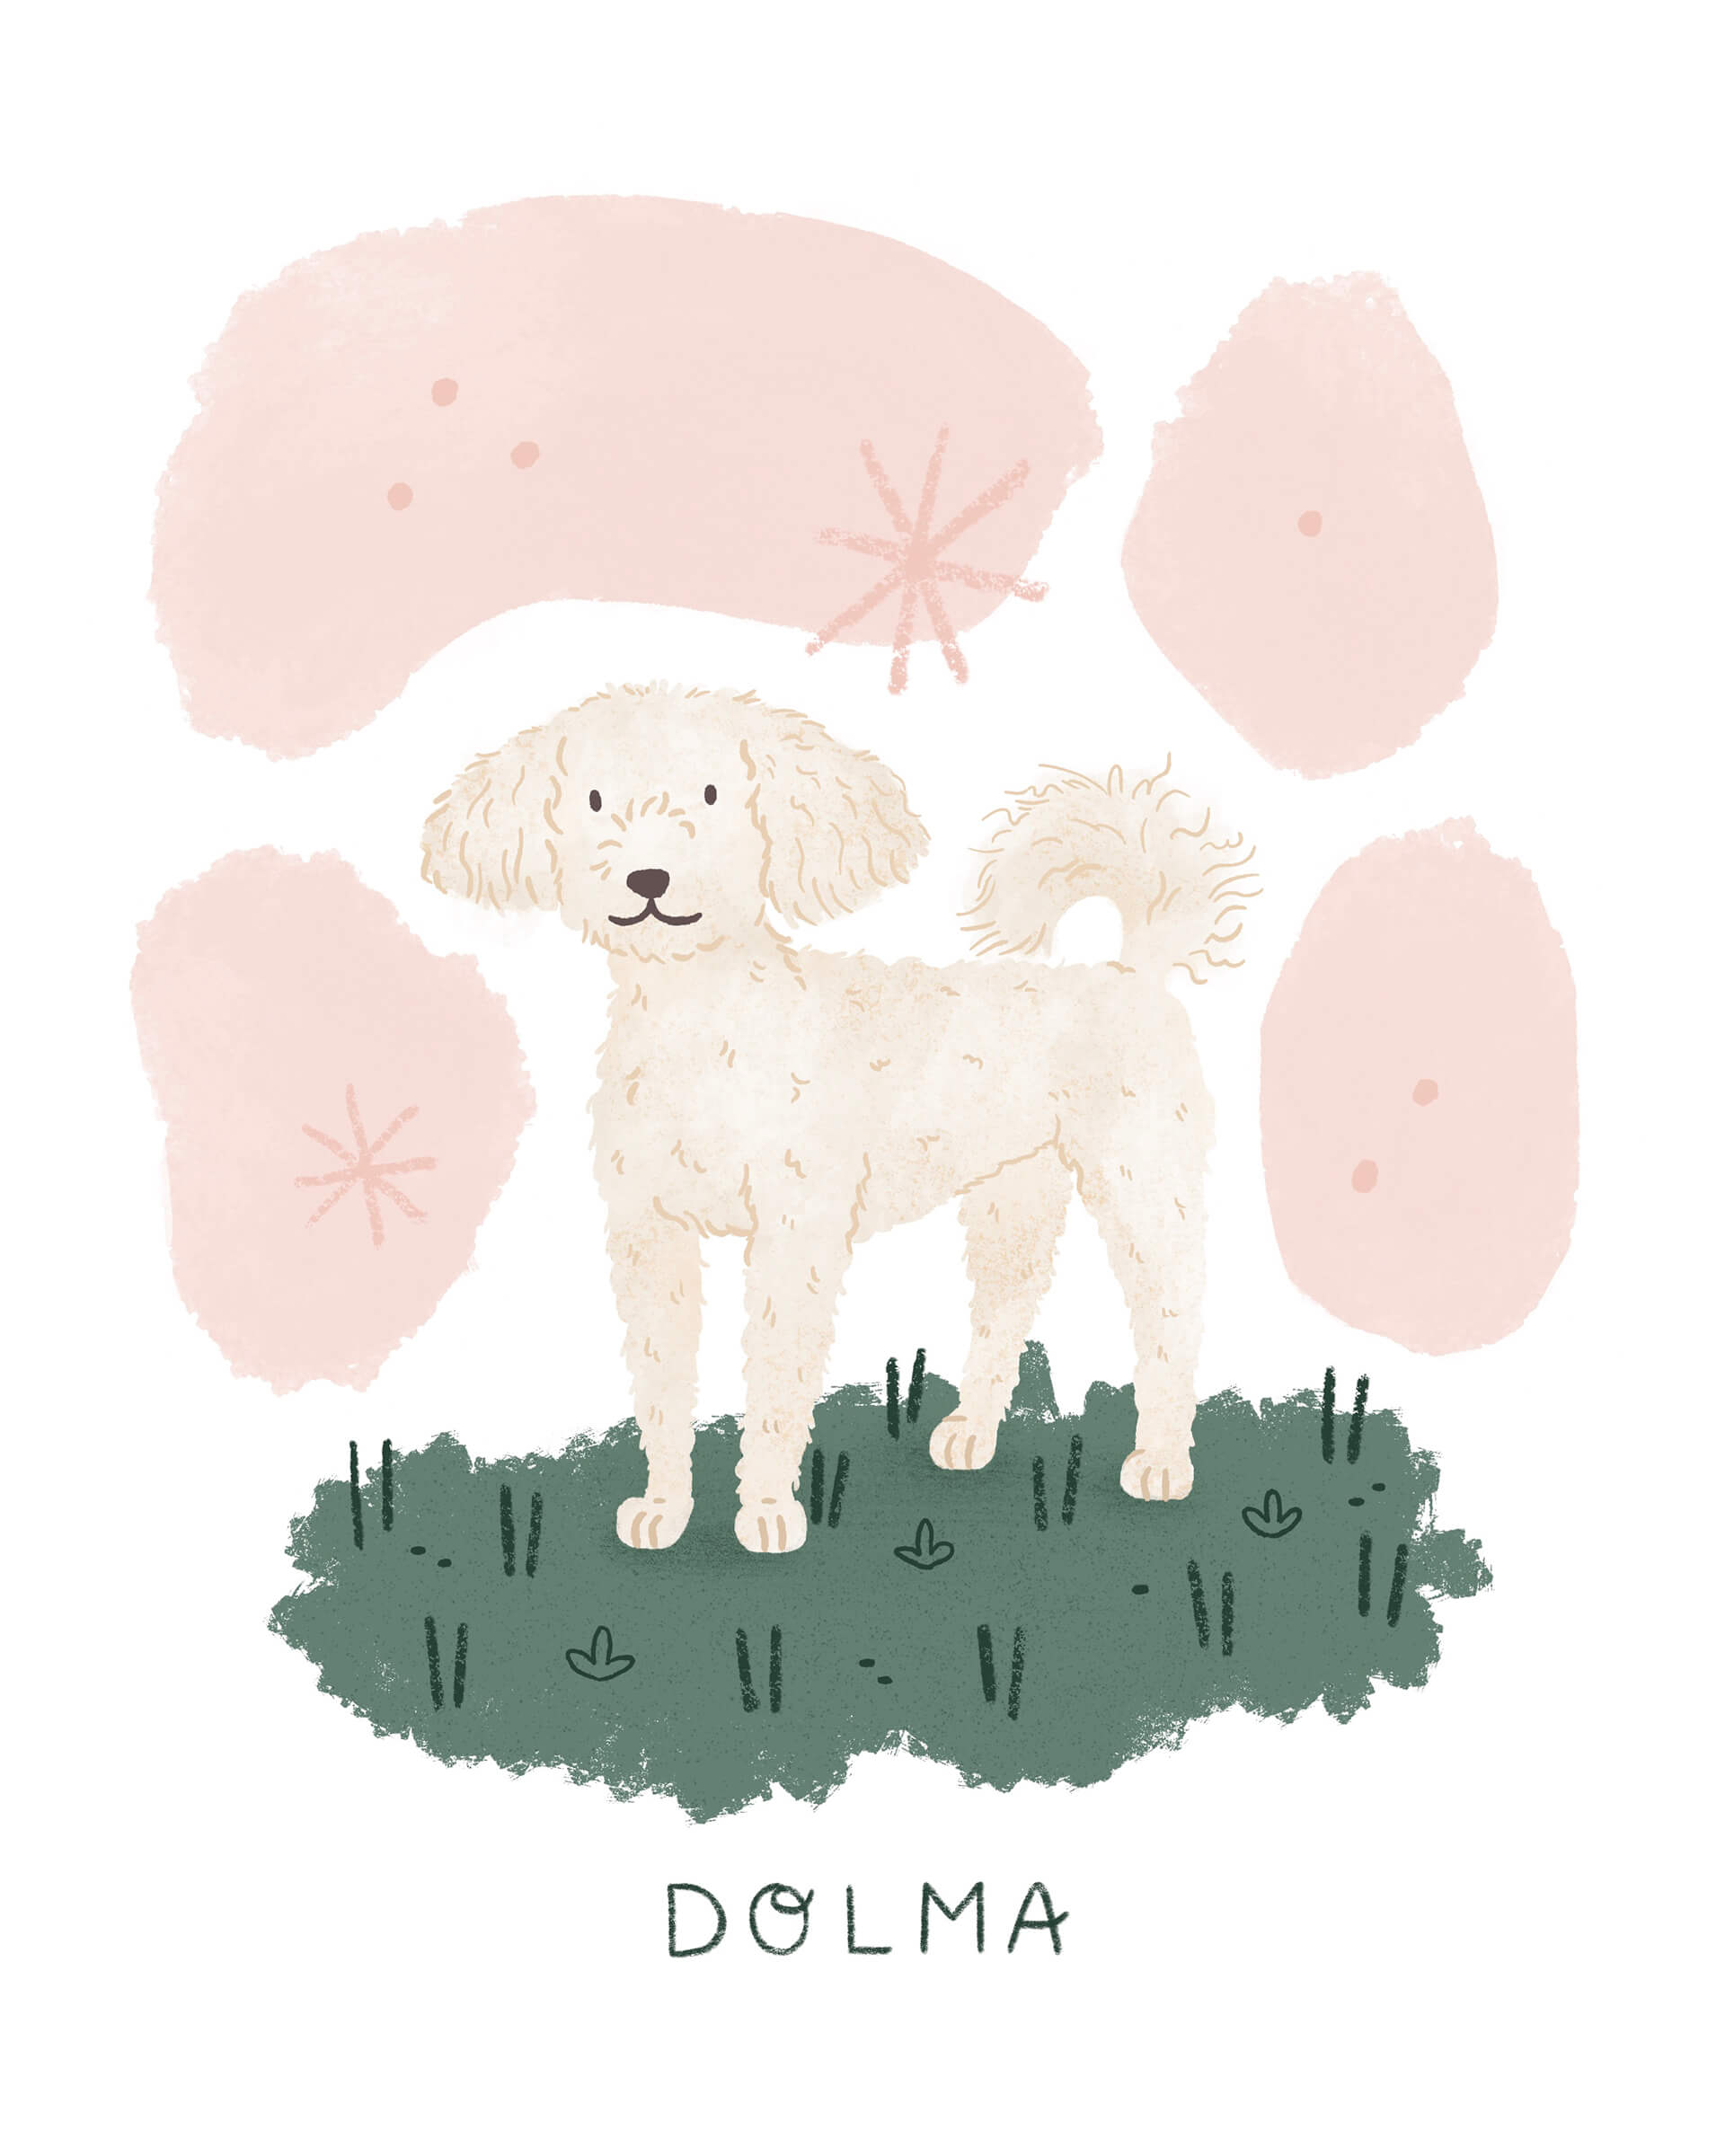 An illustrated of a small beige poodle mix dog standing on some grass with pink abstract shapes around her